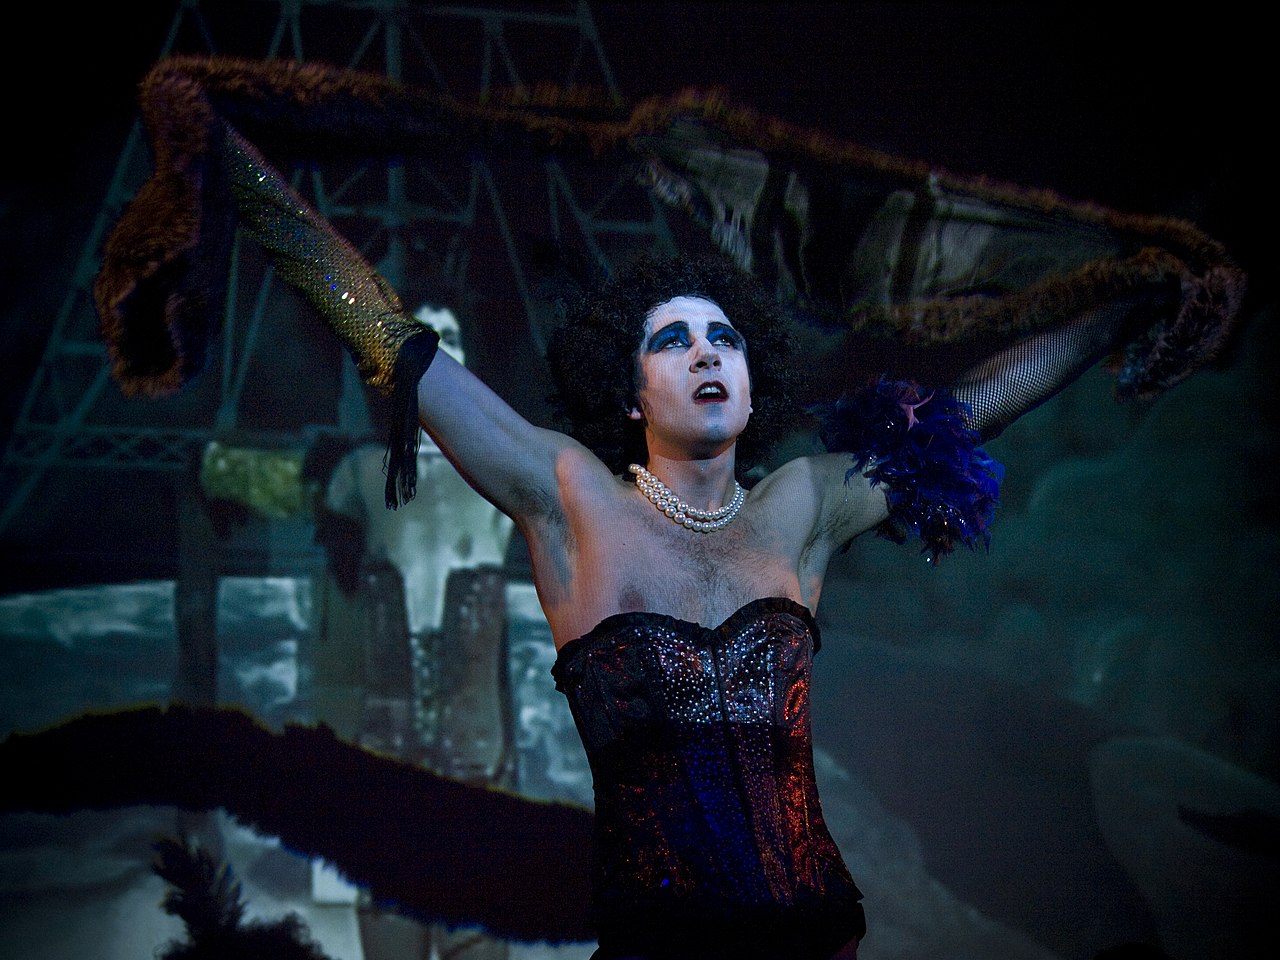 A woman in a corset on stage with her arms outstretched.